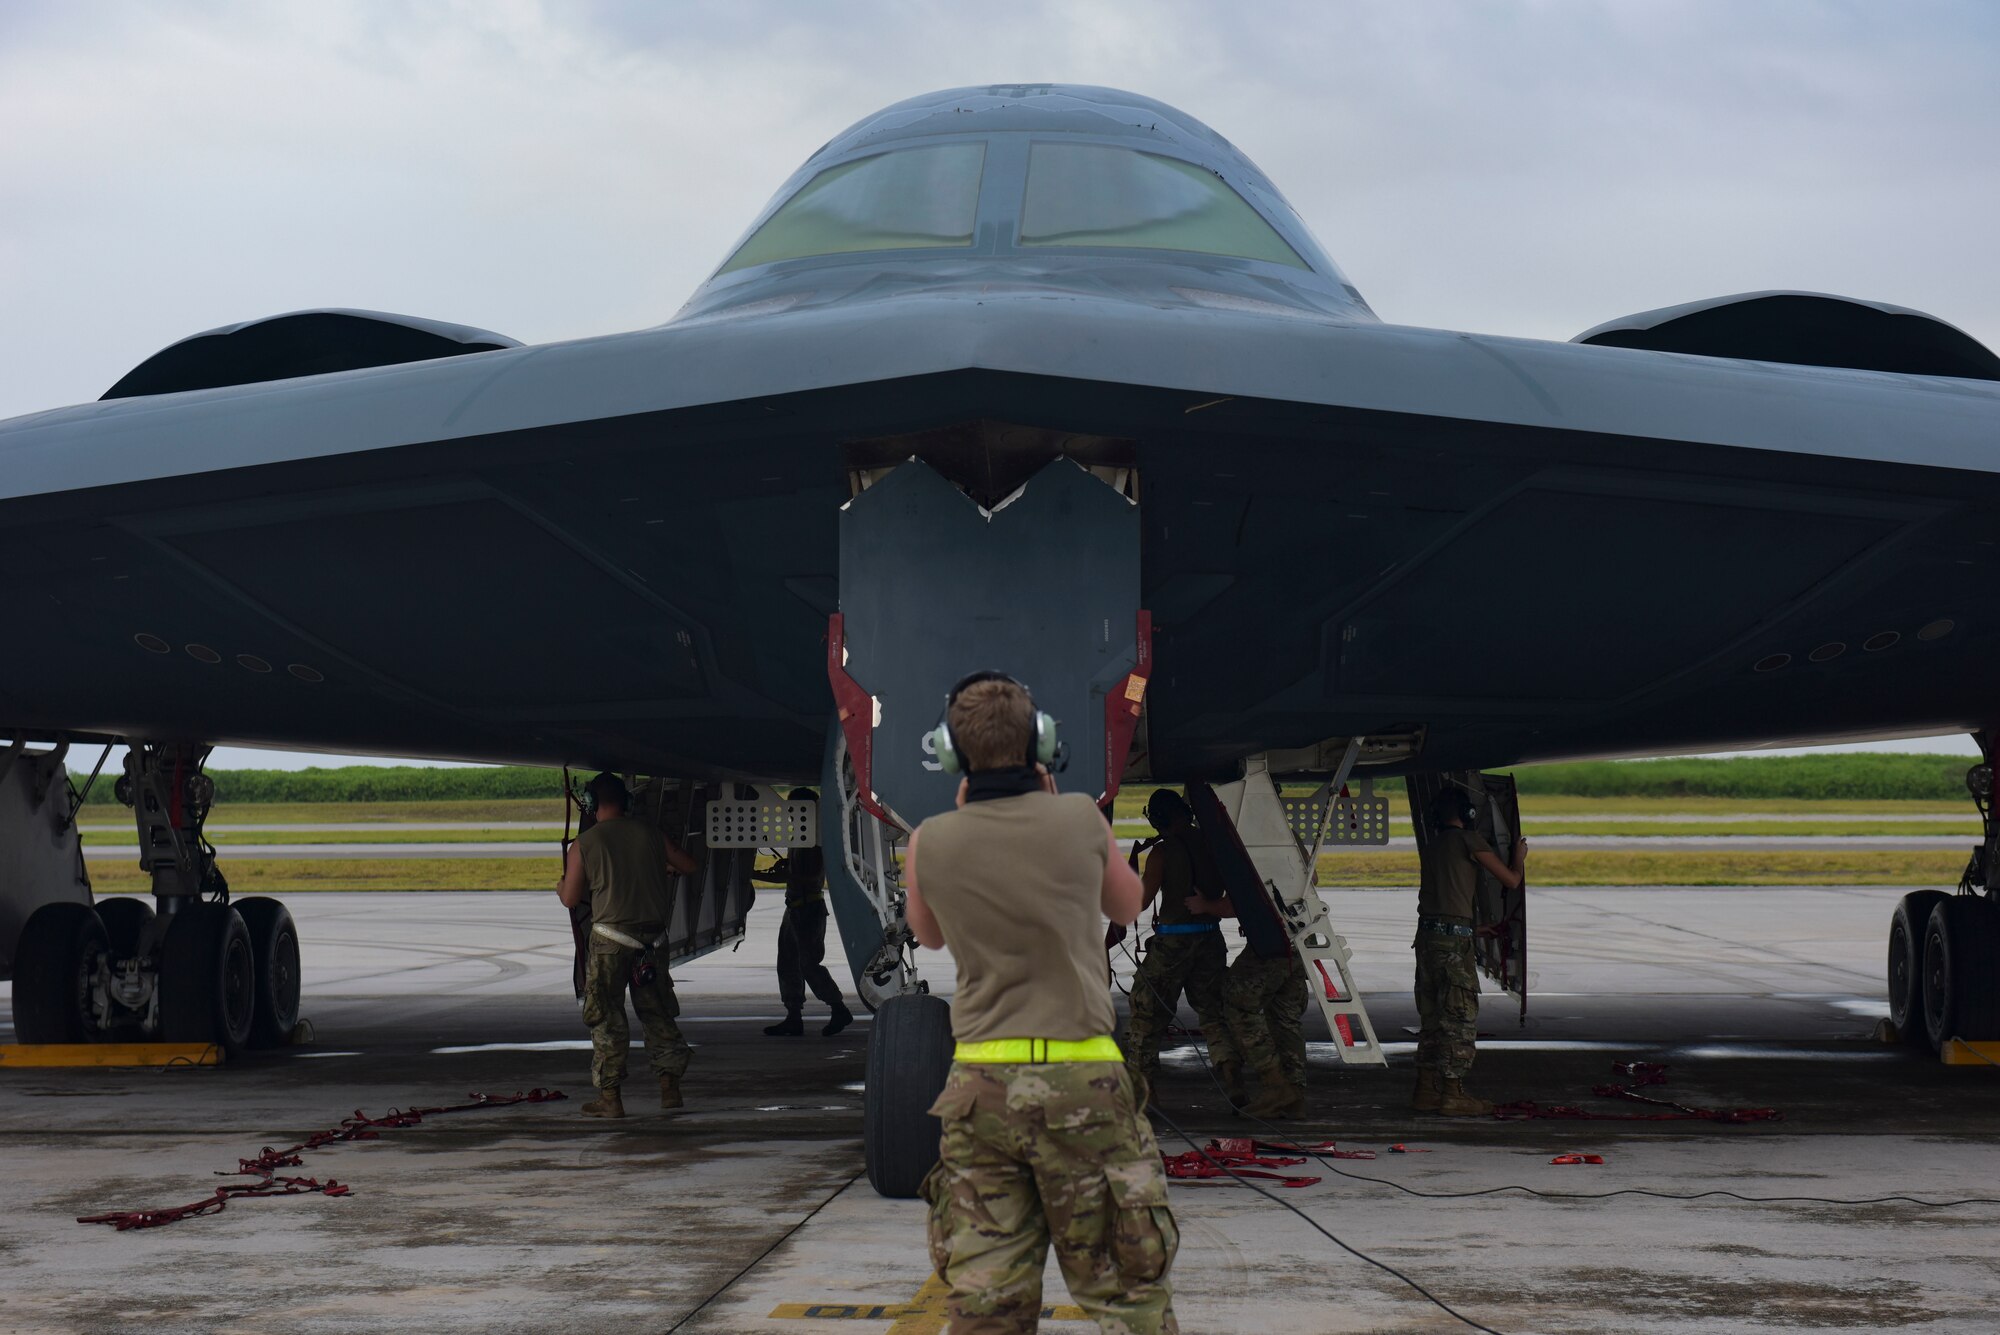 A U.S. Air Force maintainer assigned to the 393rd Expeditionary Bomb Squadron, Whiteman Air Force Base, Missouri, talks to the pilots of a B-2 Spirit Stealth Bomber at Naval Support Facility Diego Garcia, to support a Bomber Task Force mission, Aug. 14, 2020. As part of their BTF deployment, the B-2s participated in a combined United States-Australia exercise with Marine Rotational Force -Darwin and Australian Defence Forces. During the exercise, MRF-D and ADF Joint Terminal Attack Controllers coordinated airstrikes with U.S. Air Force B-1B Lancers and B-2 Spirit Stealth Bombers. (U.S. Air Force photo by Senior Airman Alexandria Lee)